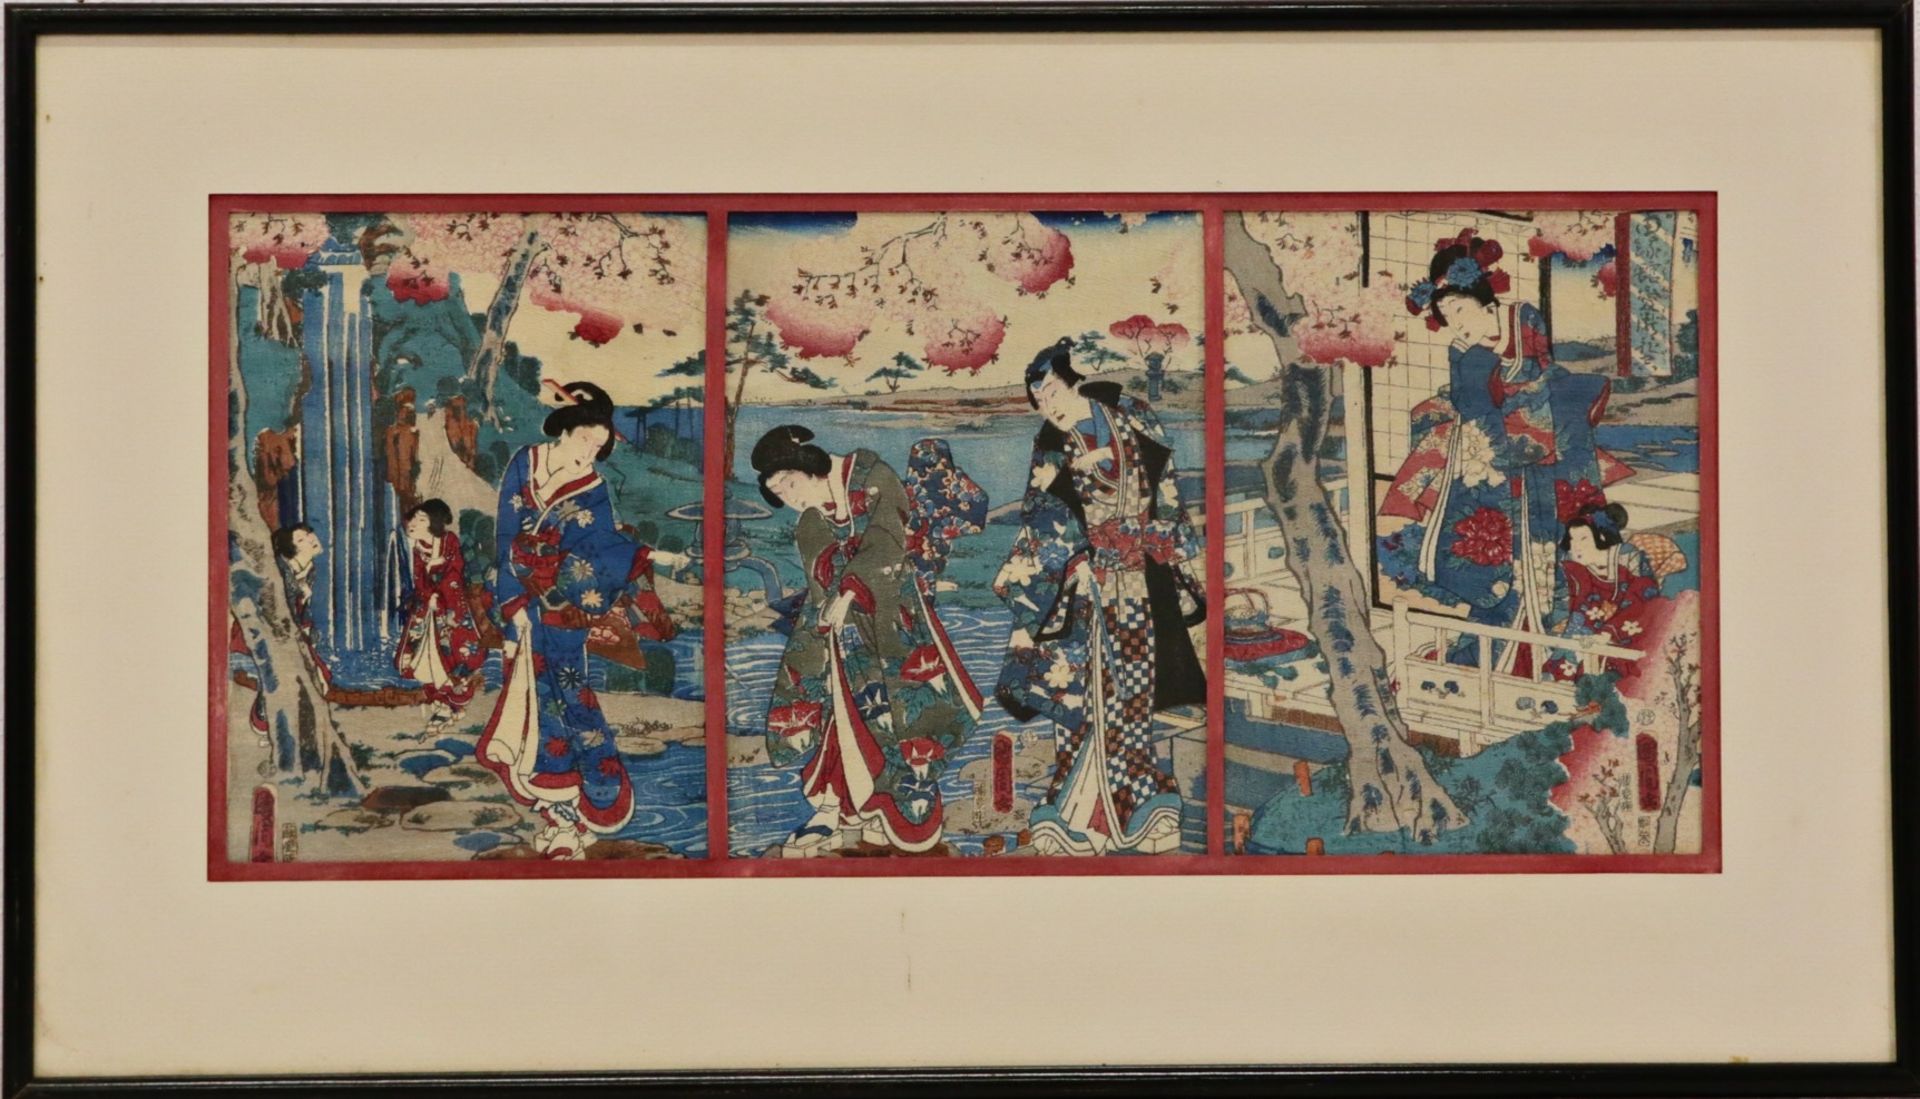 Triptych of Japanese prints, Japanese art of the 19th century. Collectible art for home decor. - Image 2 of 4